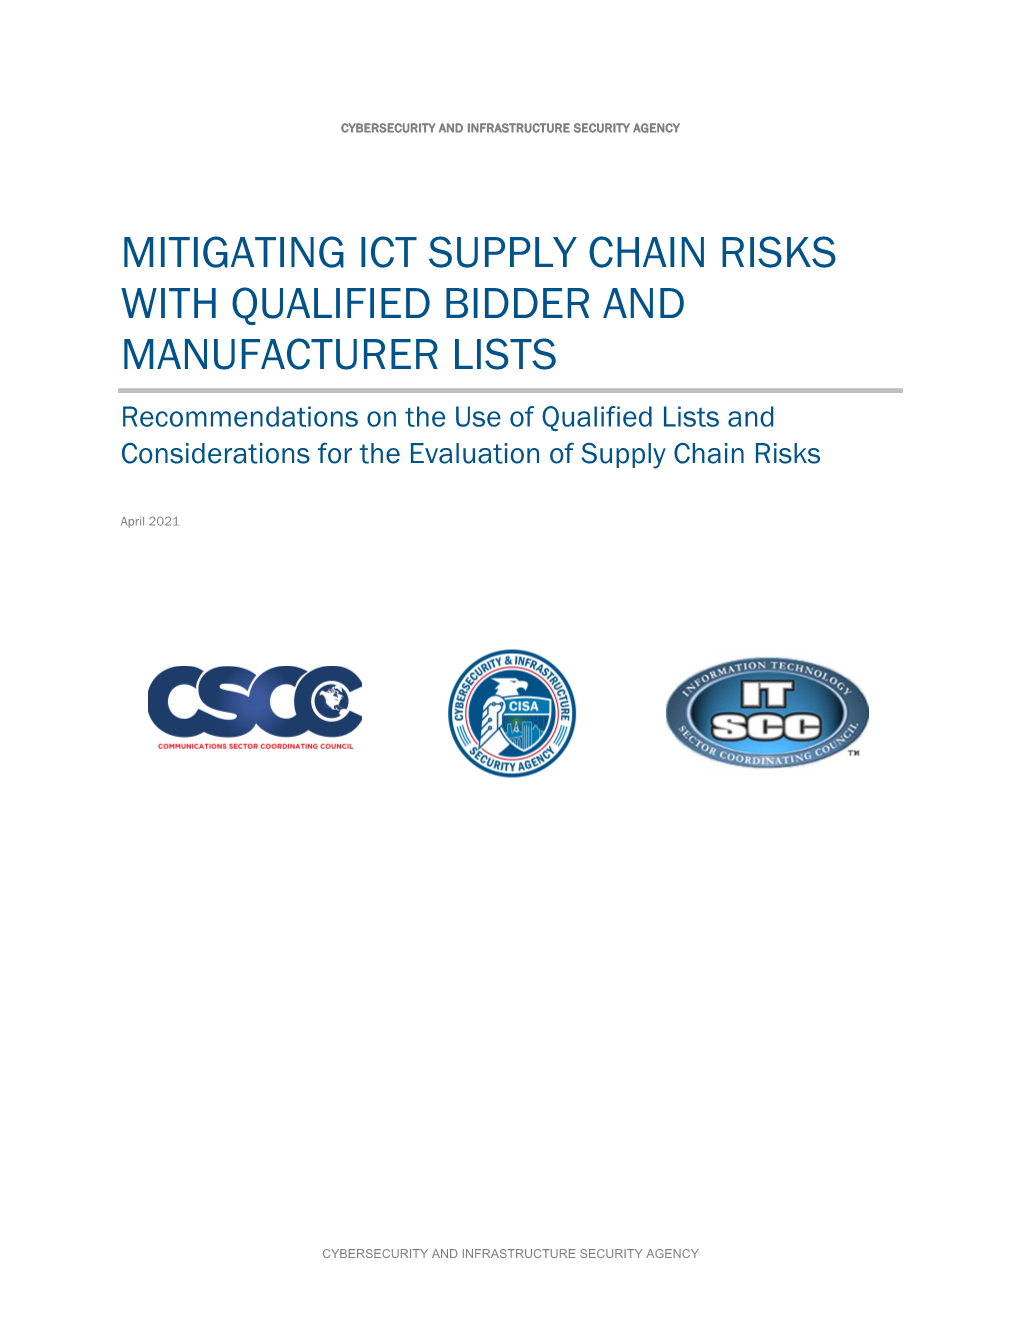 Mitigating ICT Supply Chain Risks with Qualified Bidder And